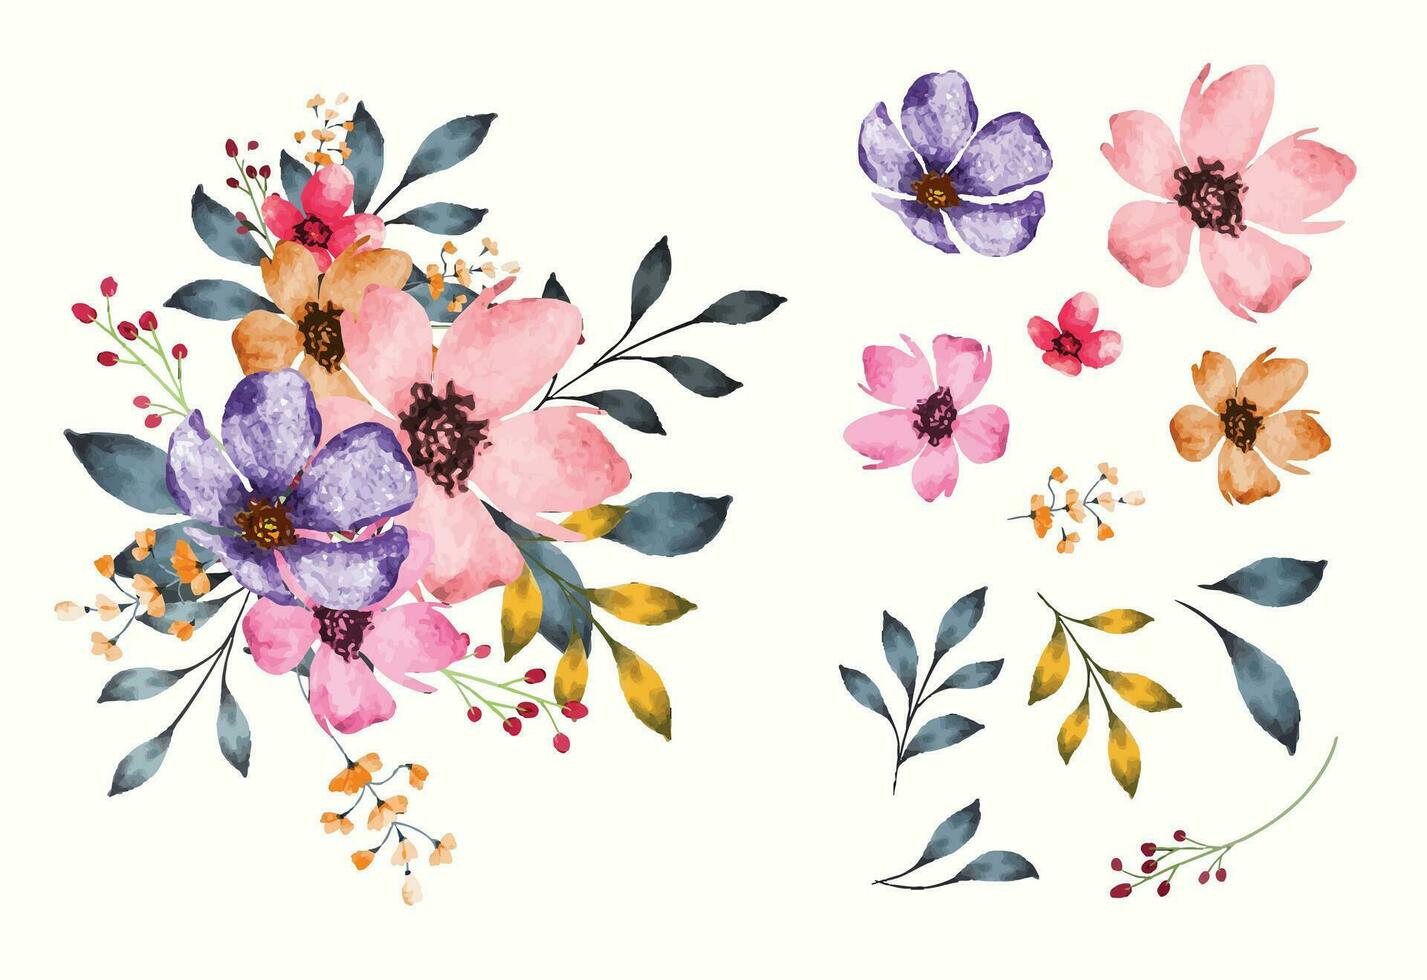 Isolated watercolor flowers and leaves with bouquet vector